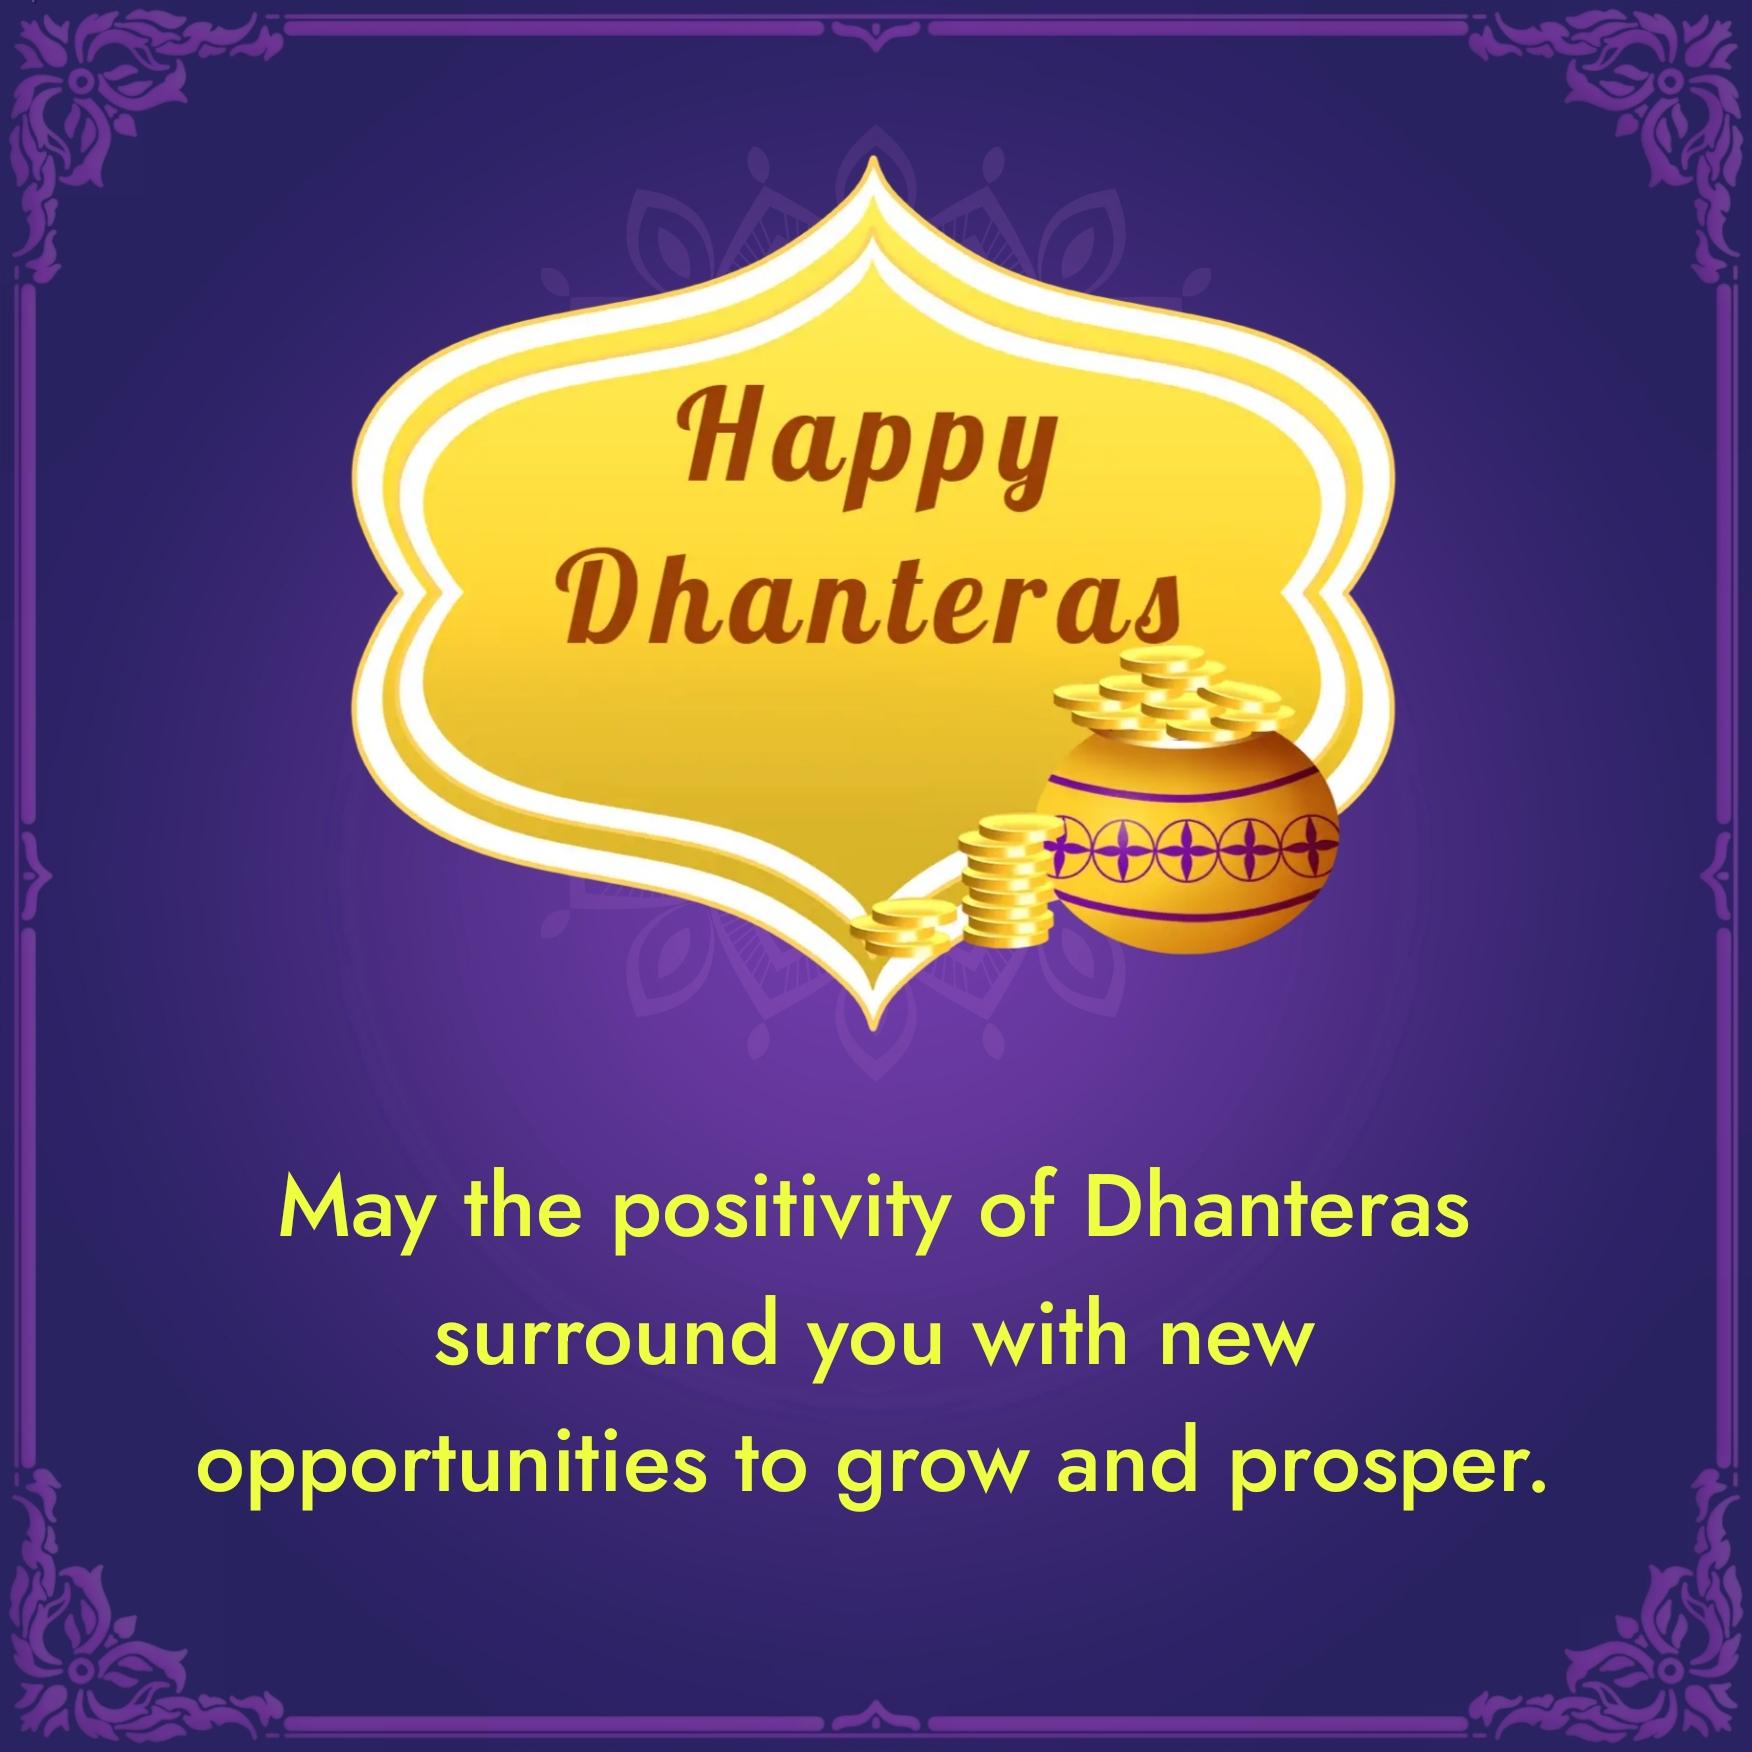 May the positivity of Dhanteras surround you with new opportunities